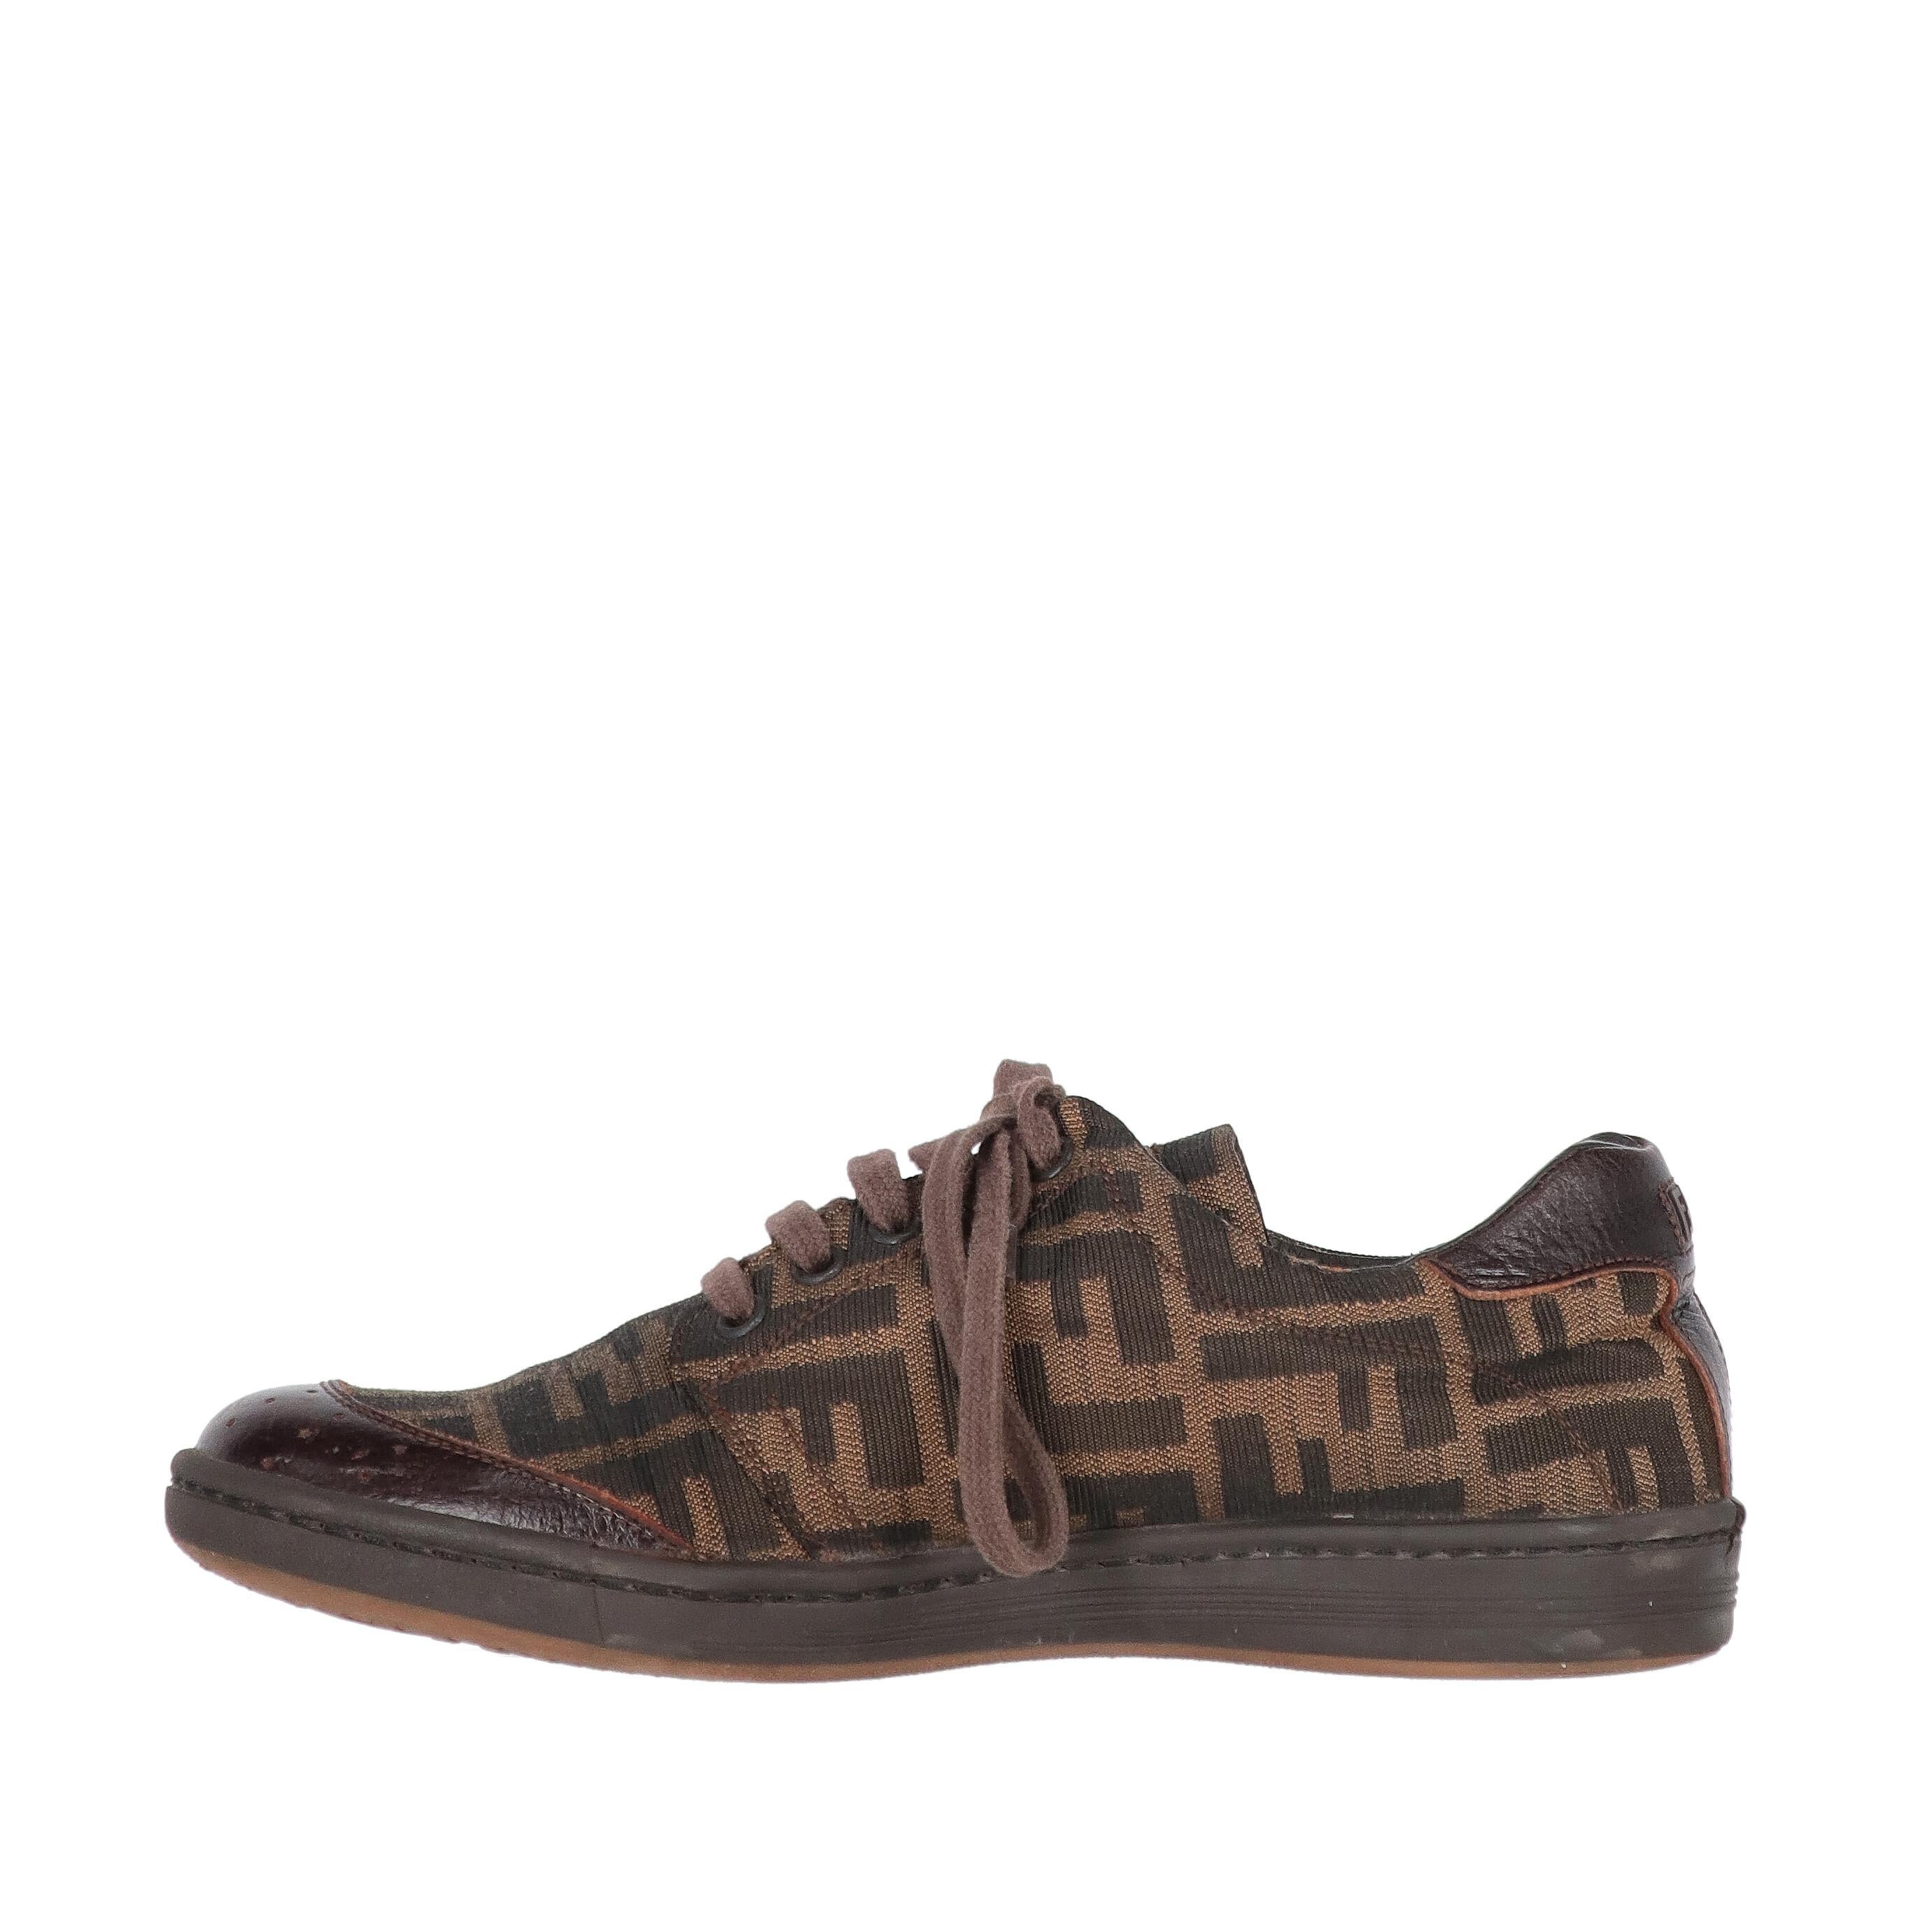 Fendi brown and beige iconic pumpkin fabric lace-up shoes with brown leather details. Round toe with rubber sole.

The item shows signs of wear on the leather and the sole, as shown in the pictures.

Years: 2000s
Made in Italy
Size: 37 EU

Insole: